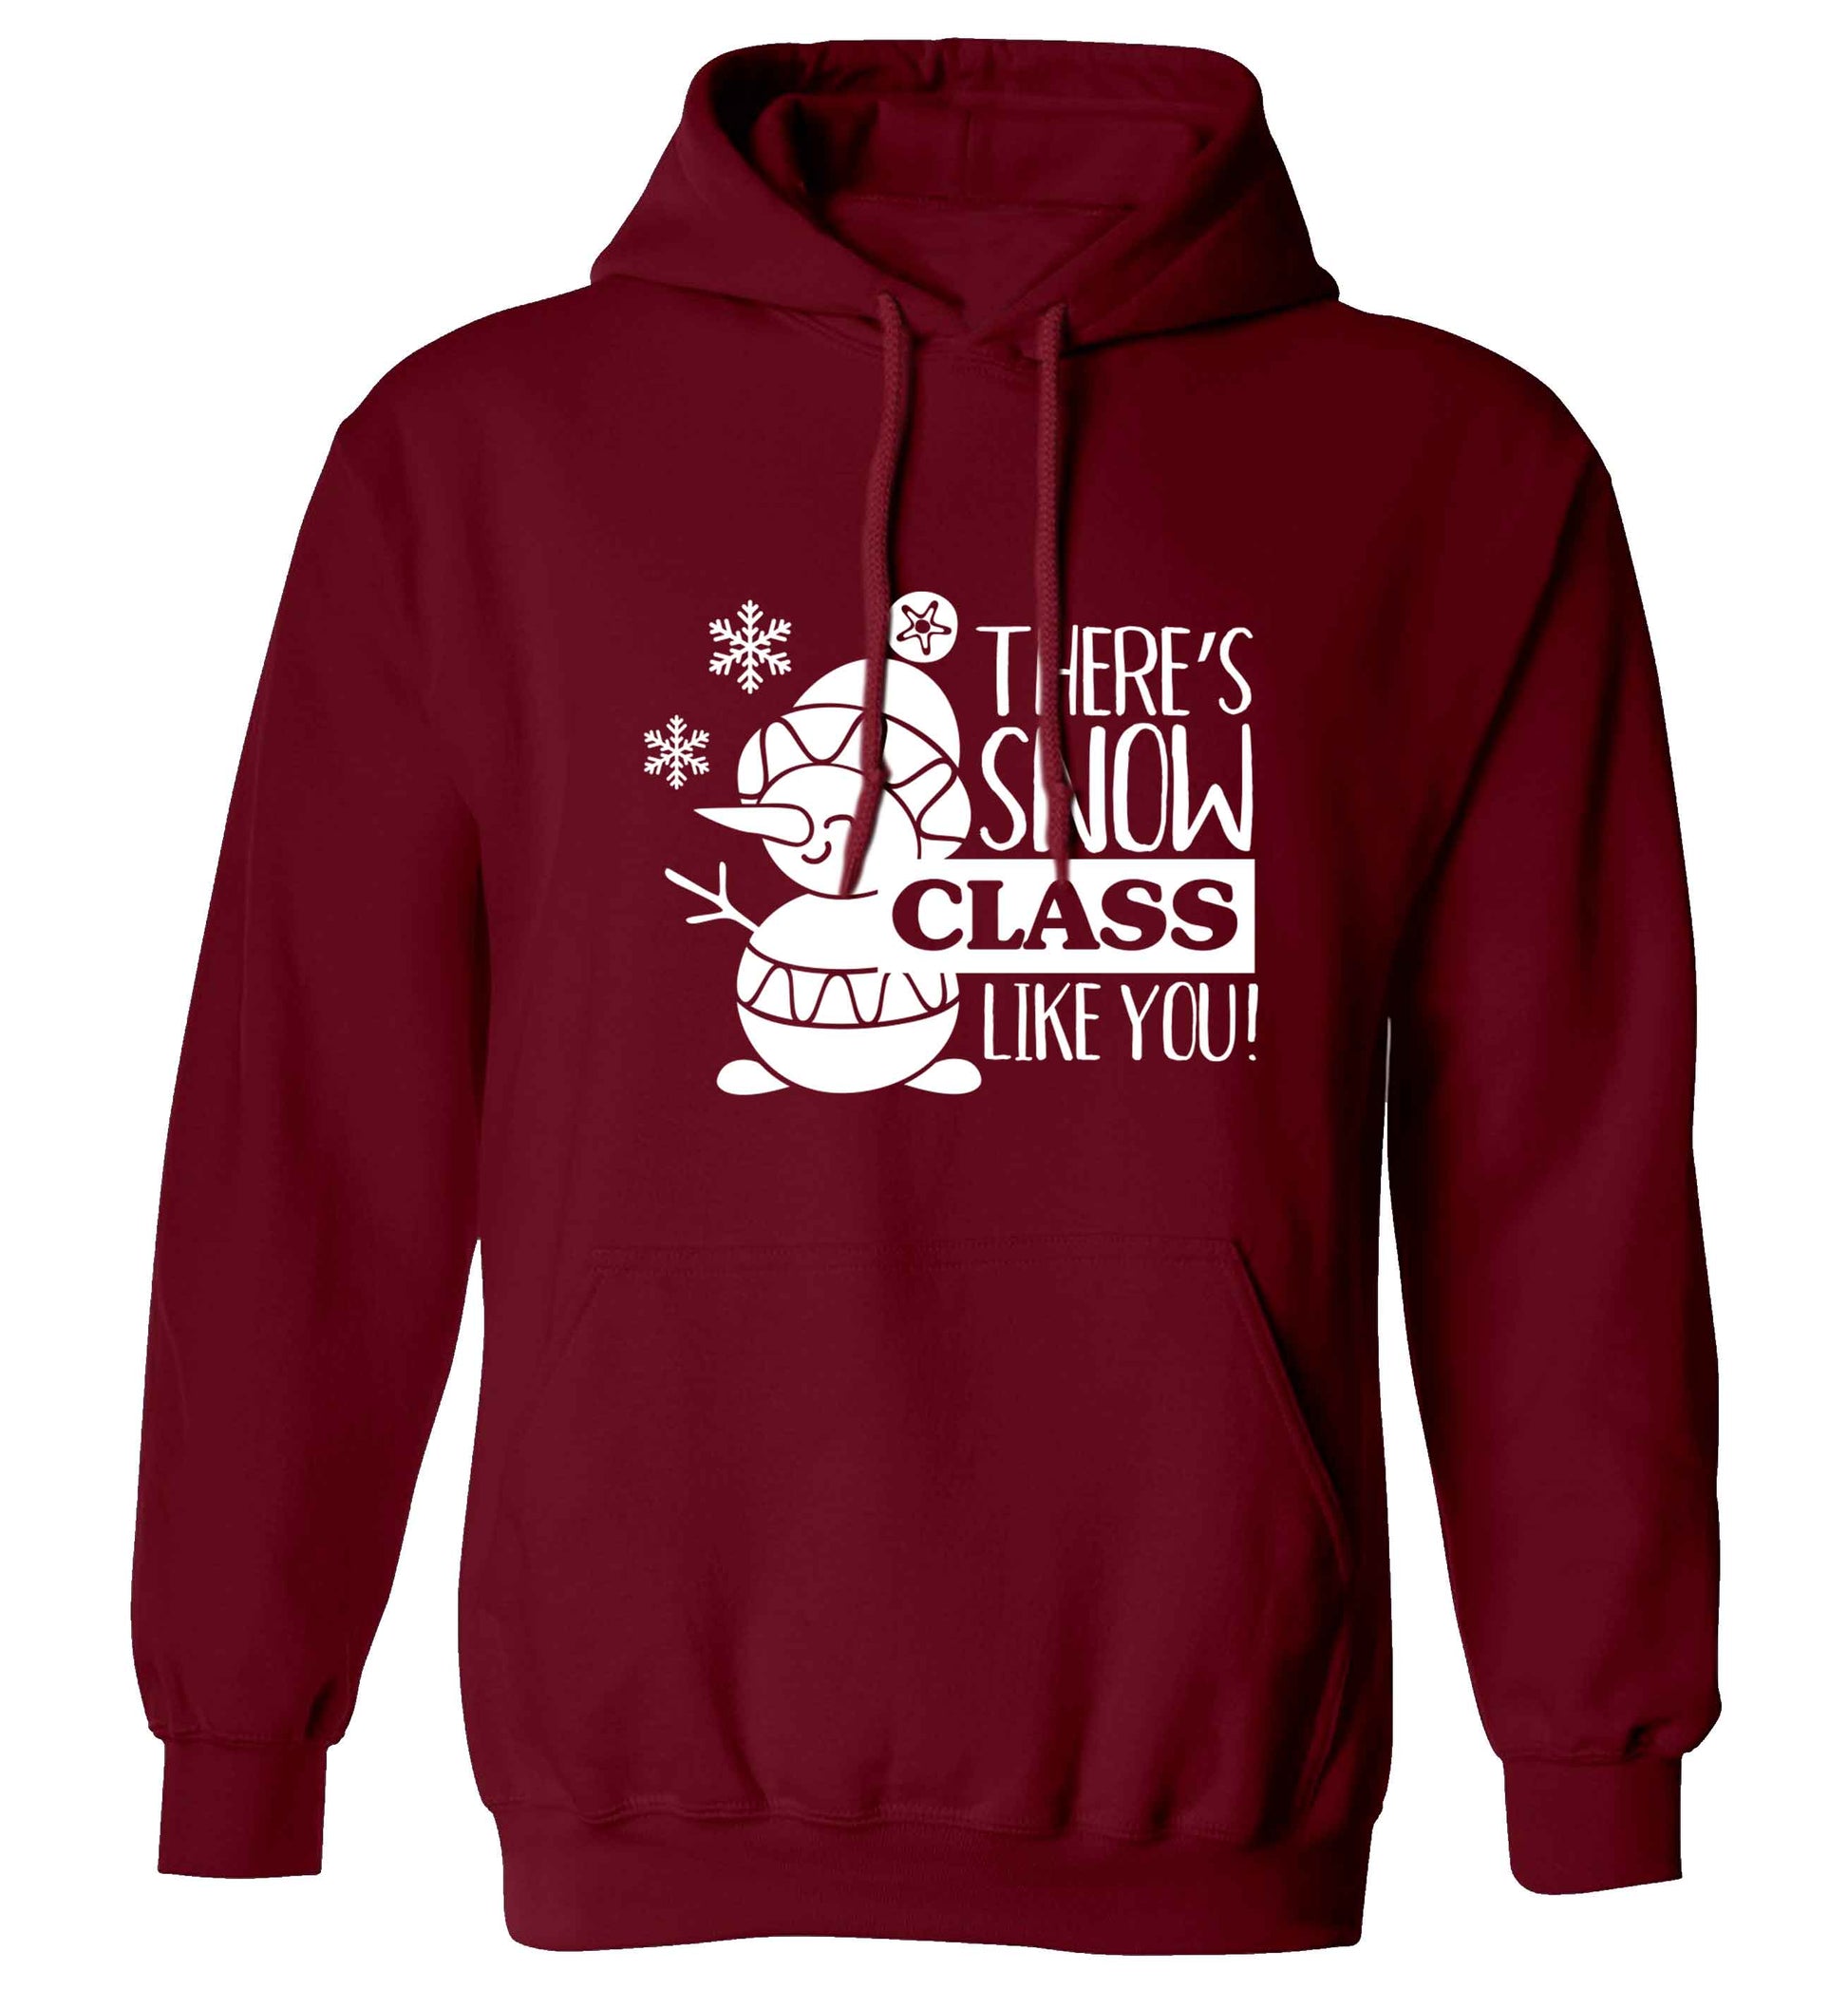 There's snow class like you adults unisex maroon hoodie 2XL